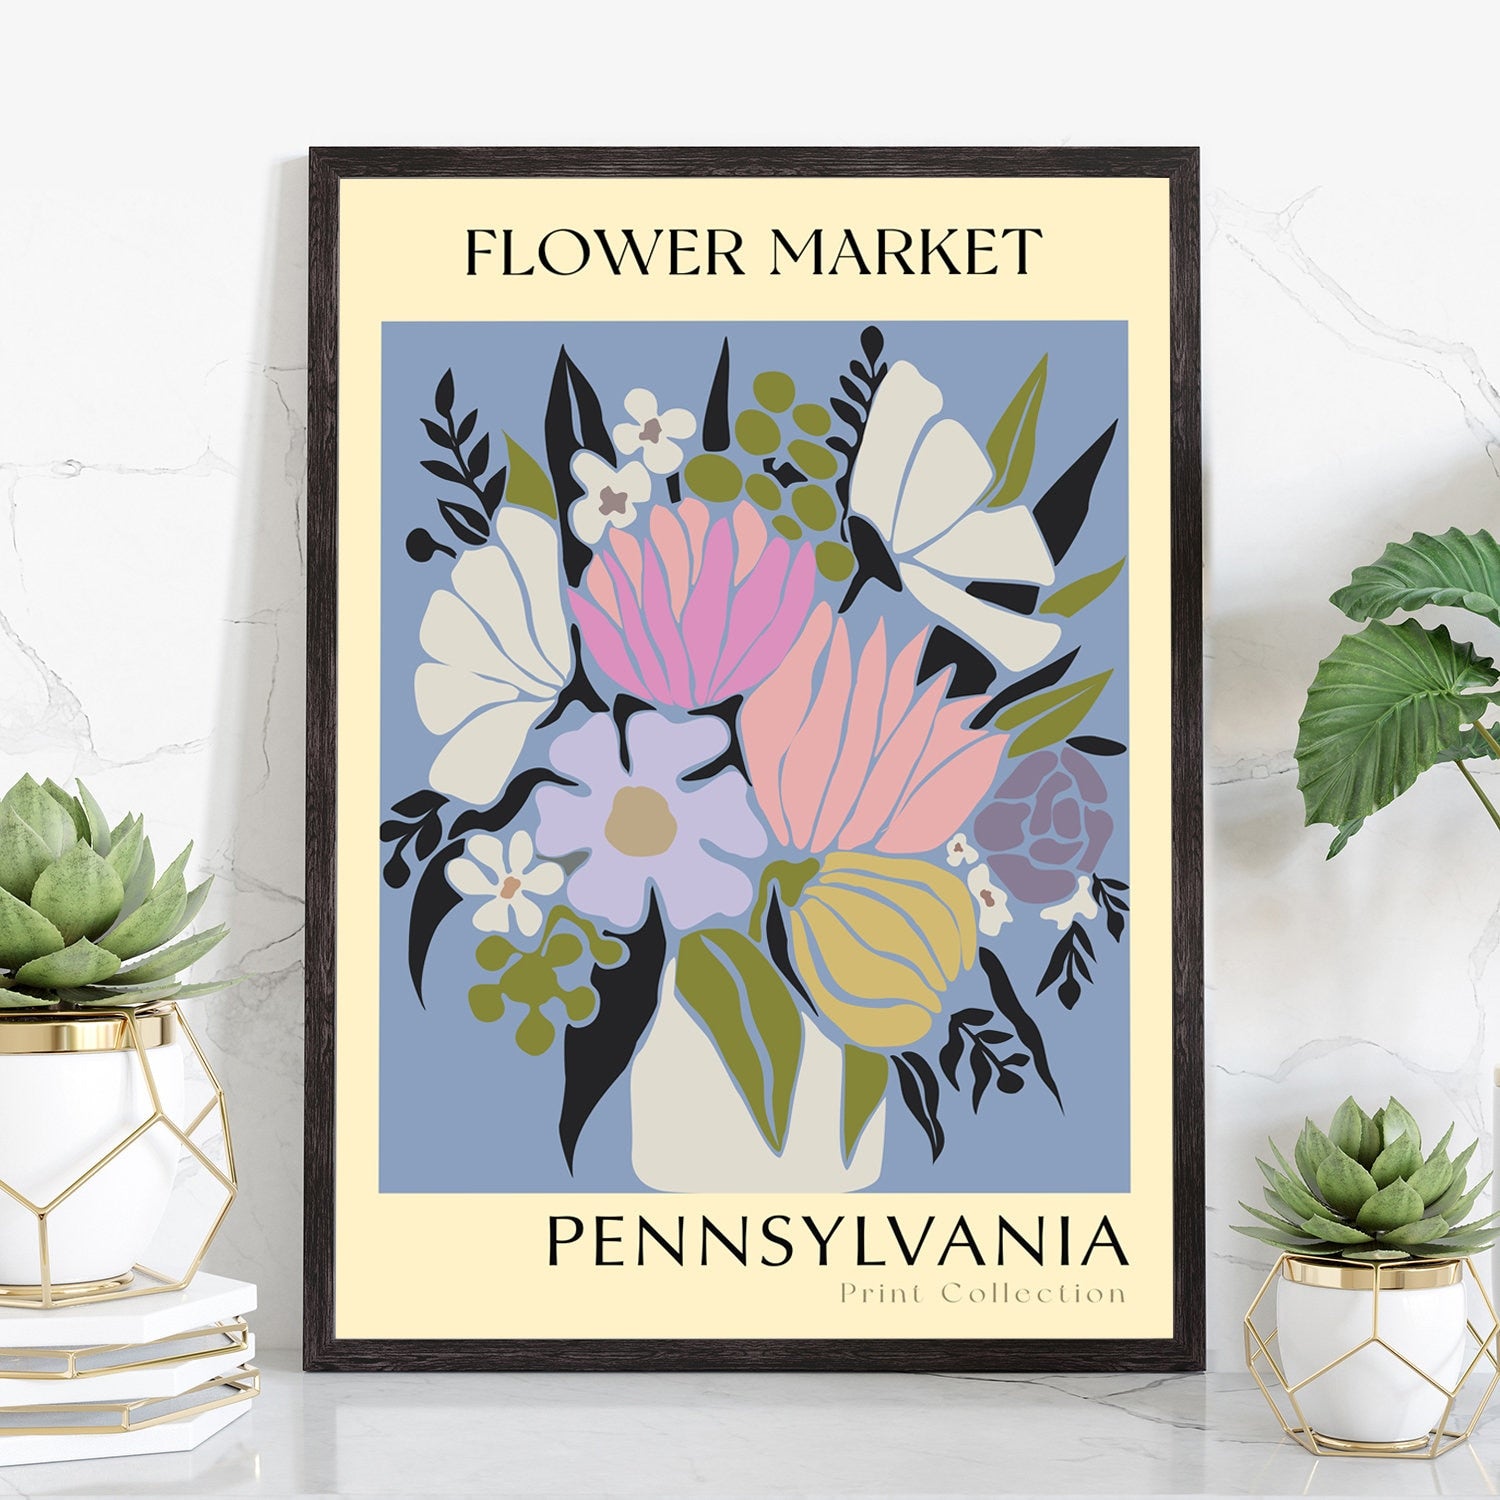 Pennsylvania State flower print, States poster, Pennsylvania flower market poster, Botanical posters, Nature poster artwork, Floral wall art